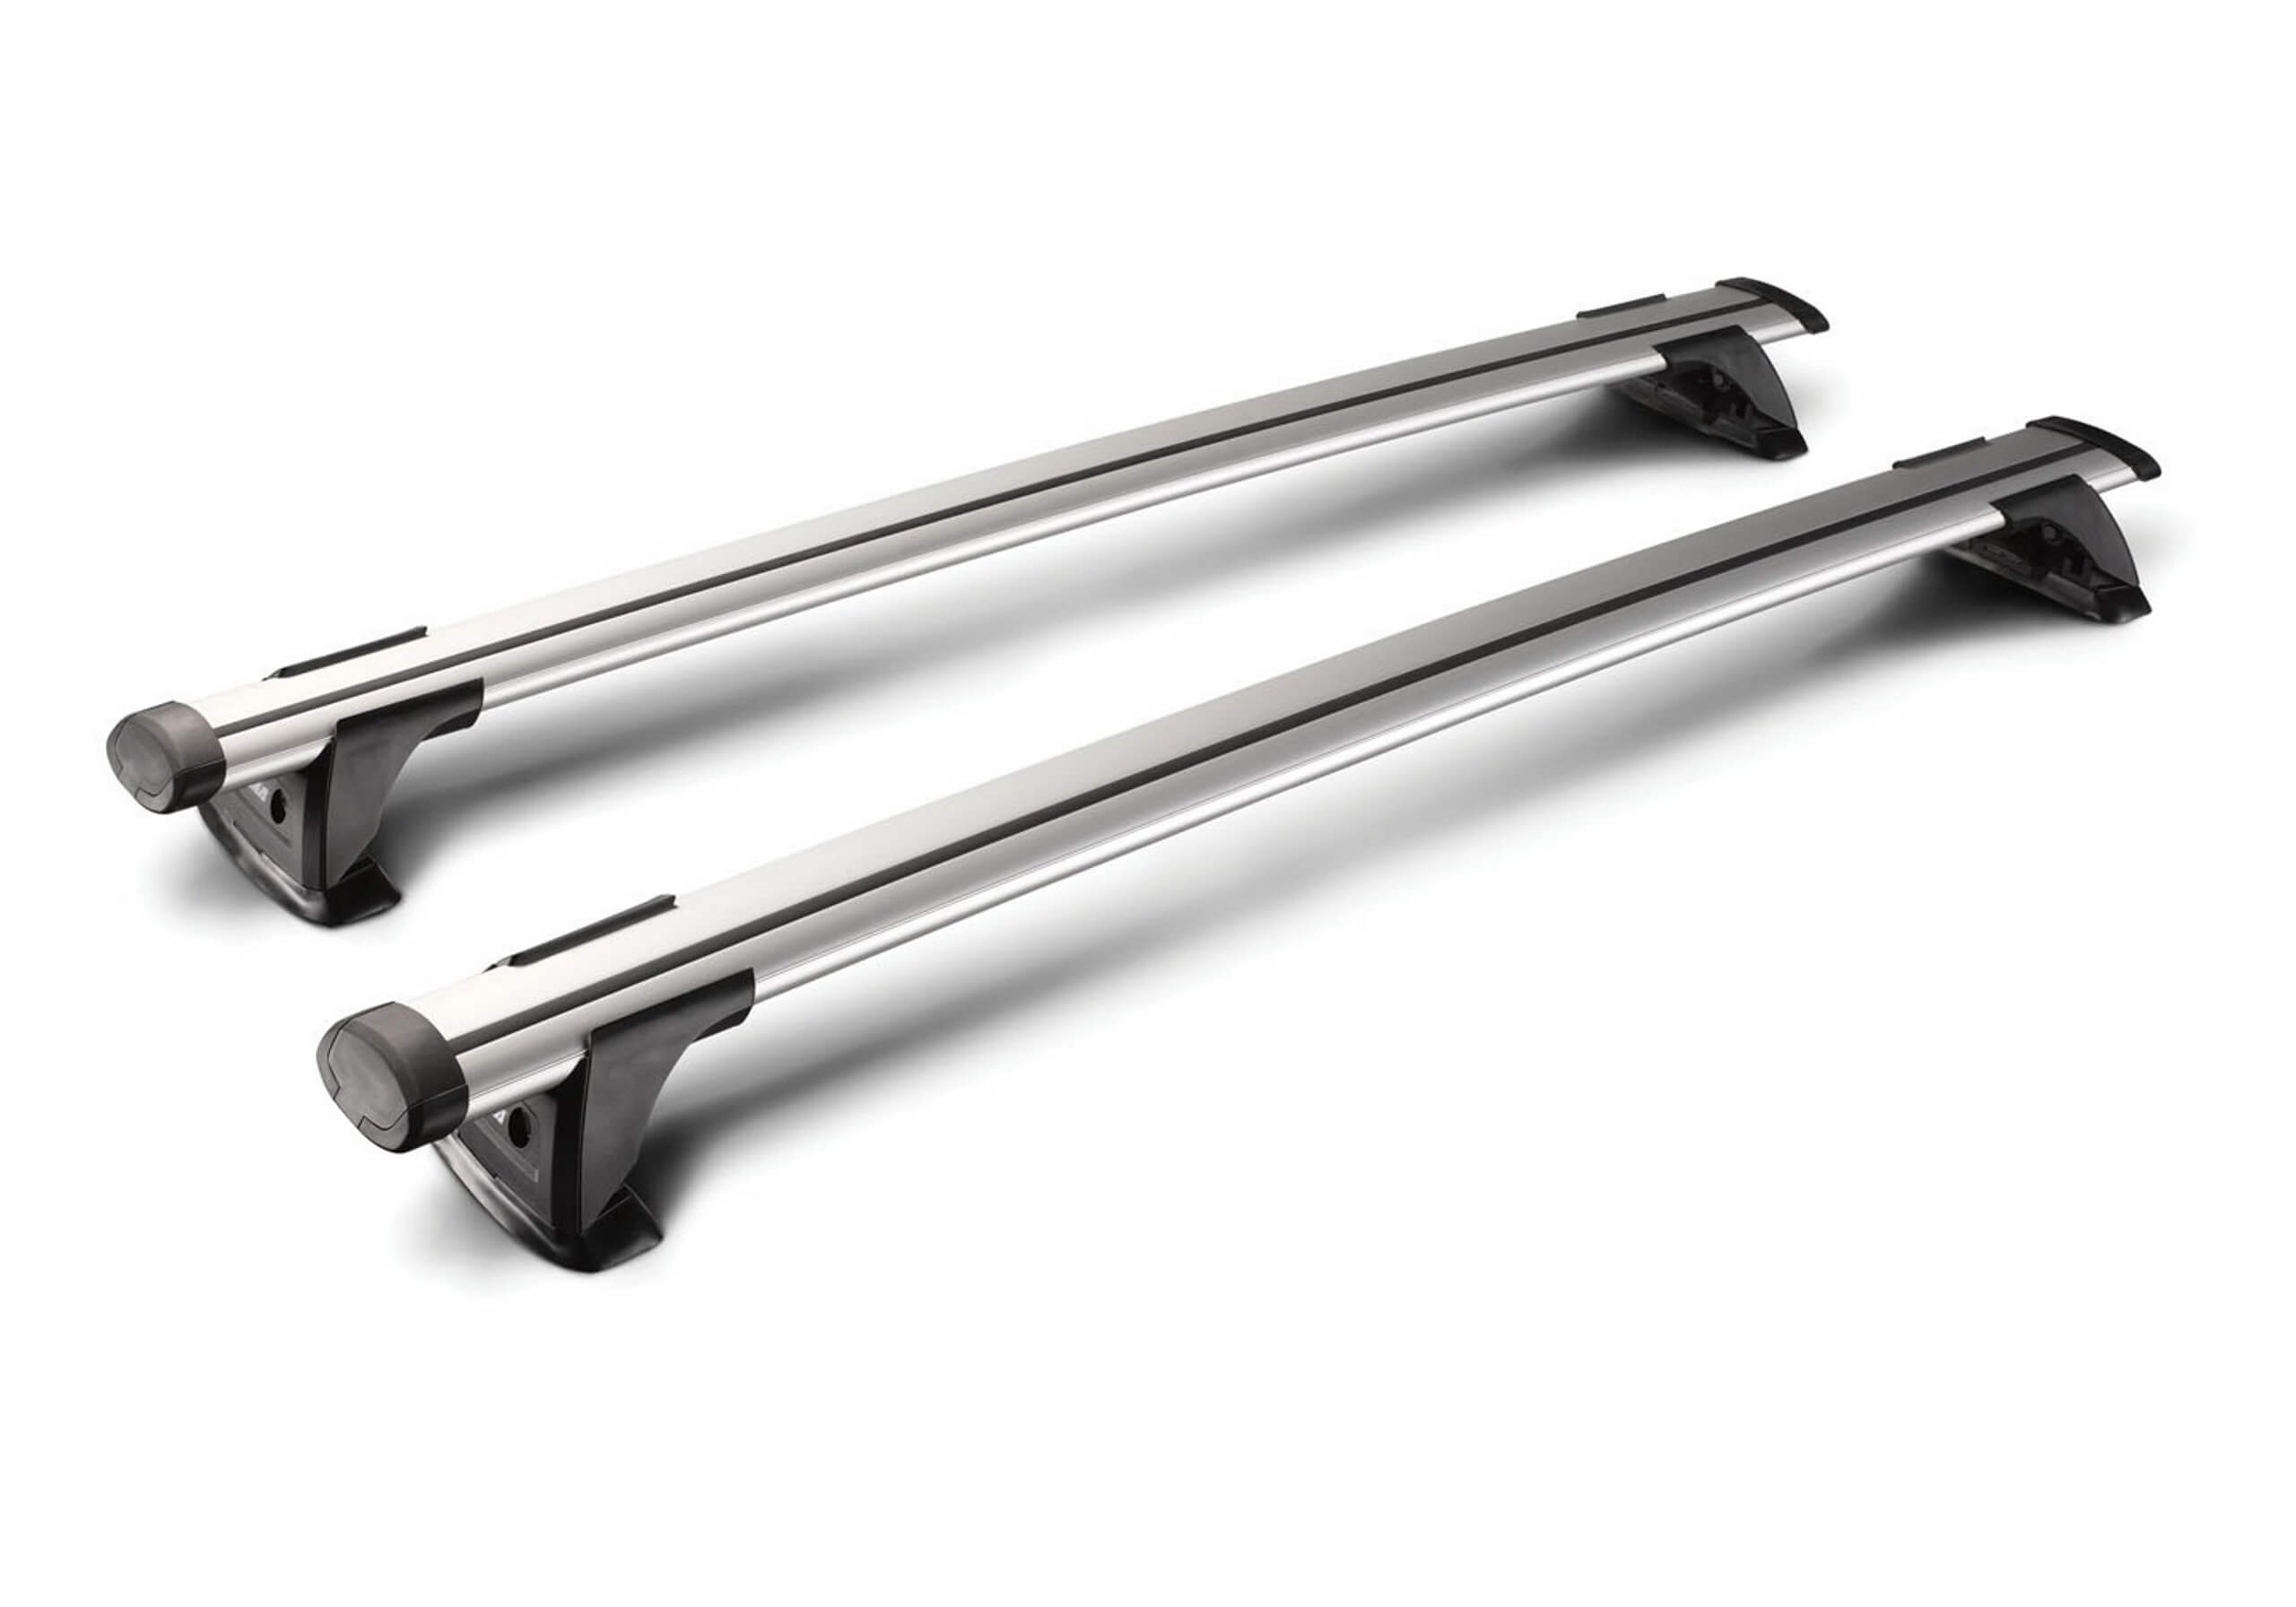 Nissan Pathfinder five door (2005 to 2013):Yakima roof bars package - S17 silver bars with K493 kit